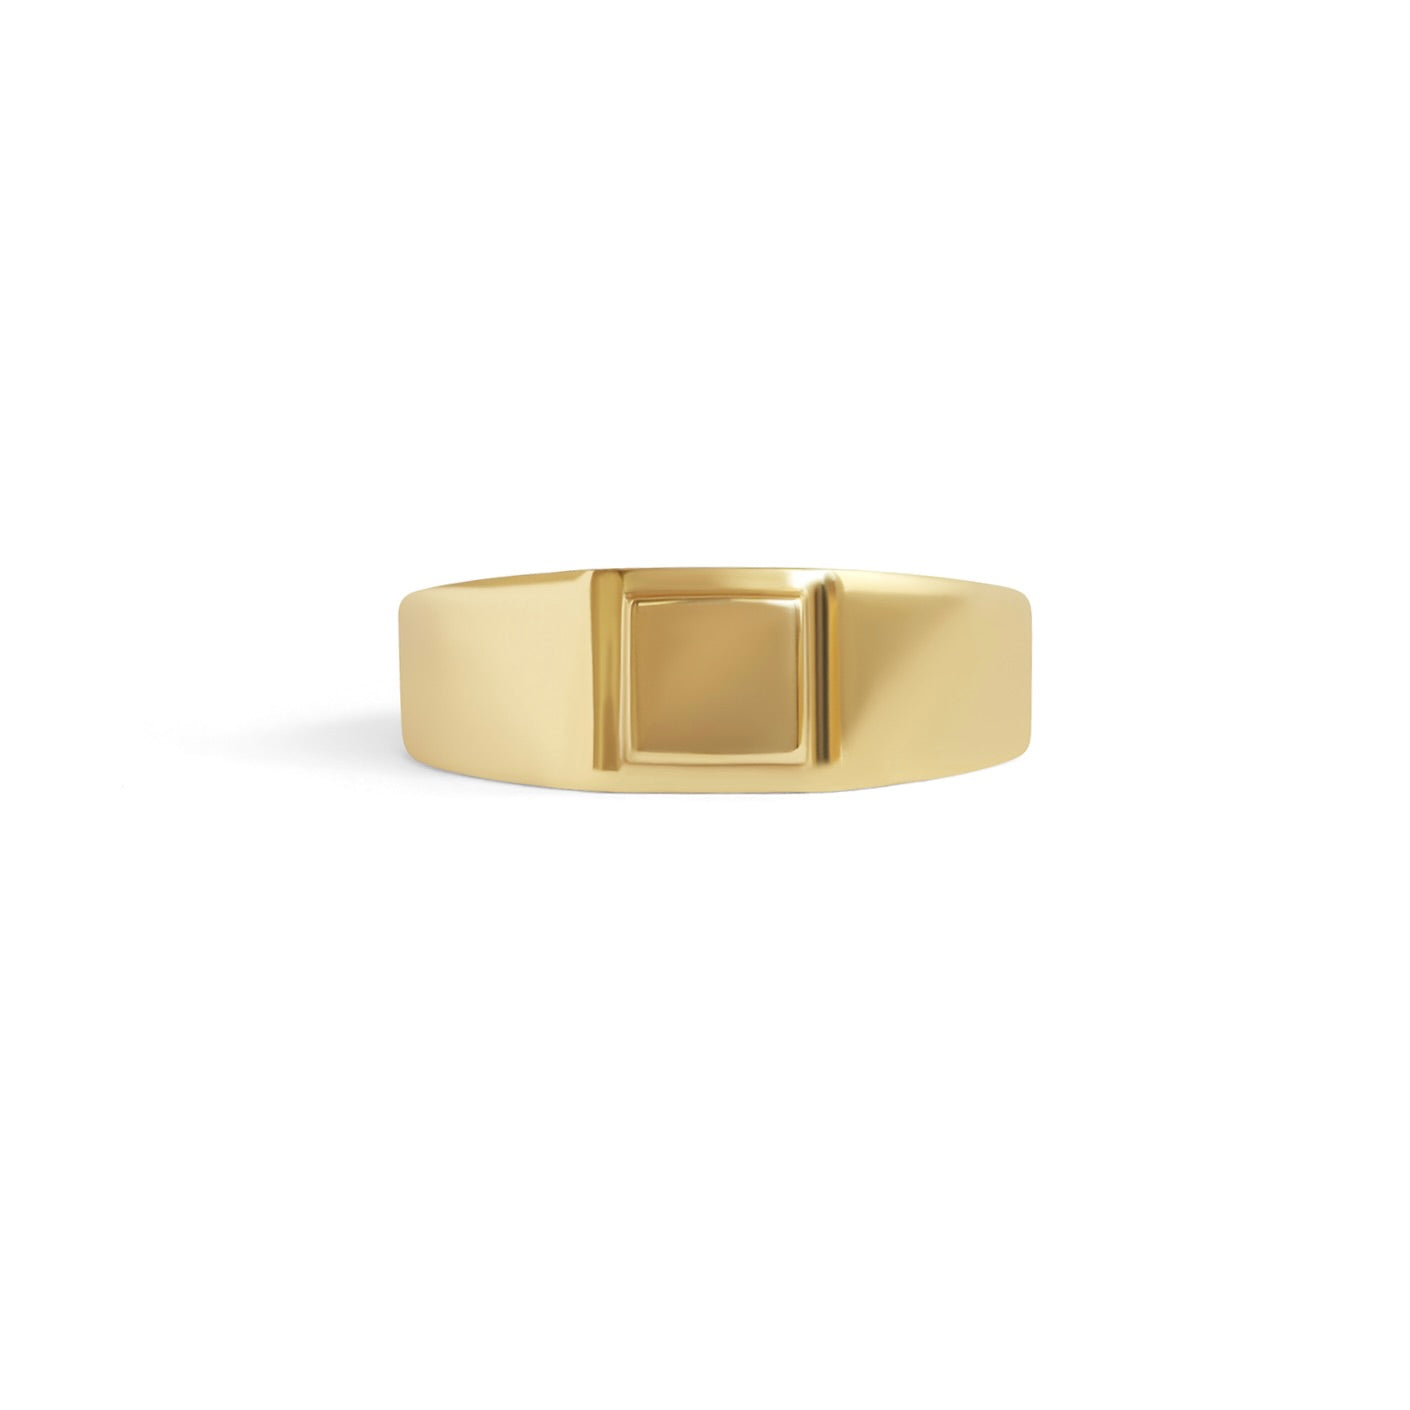 Step Signet Ring / Small Square